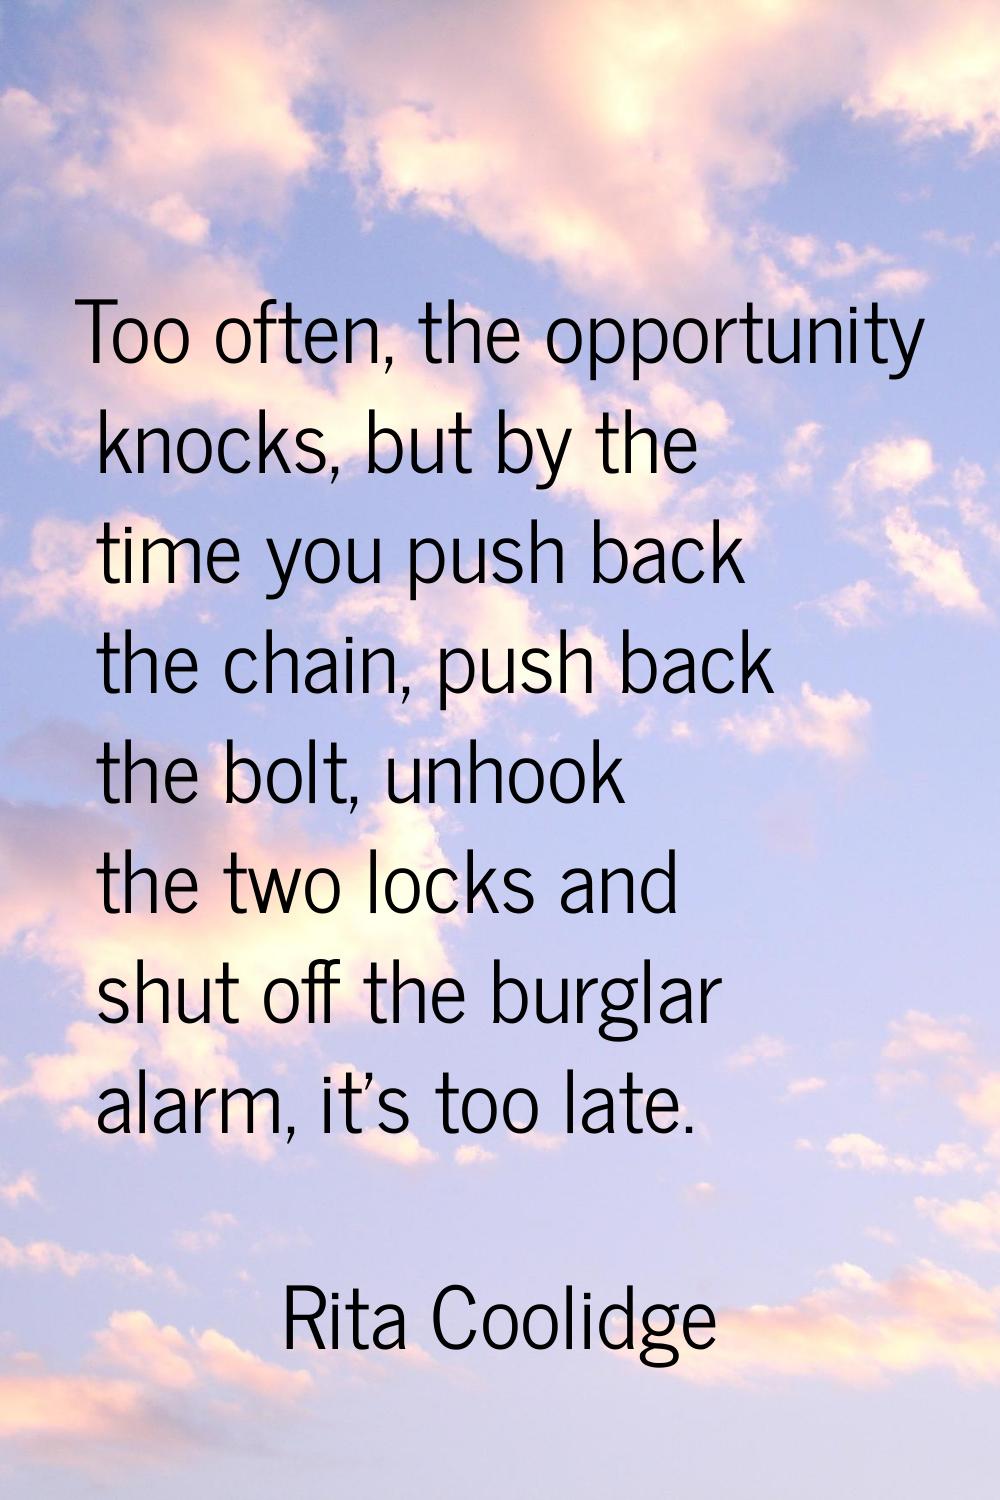 Too often, the opportunity knocks, but by the time you push back the chain, push back the bolt, unh